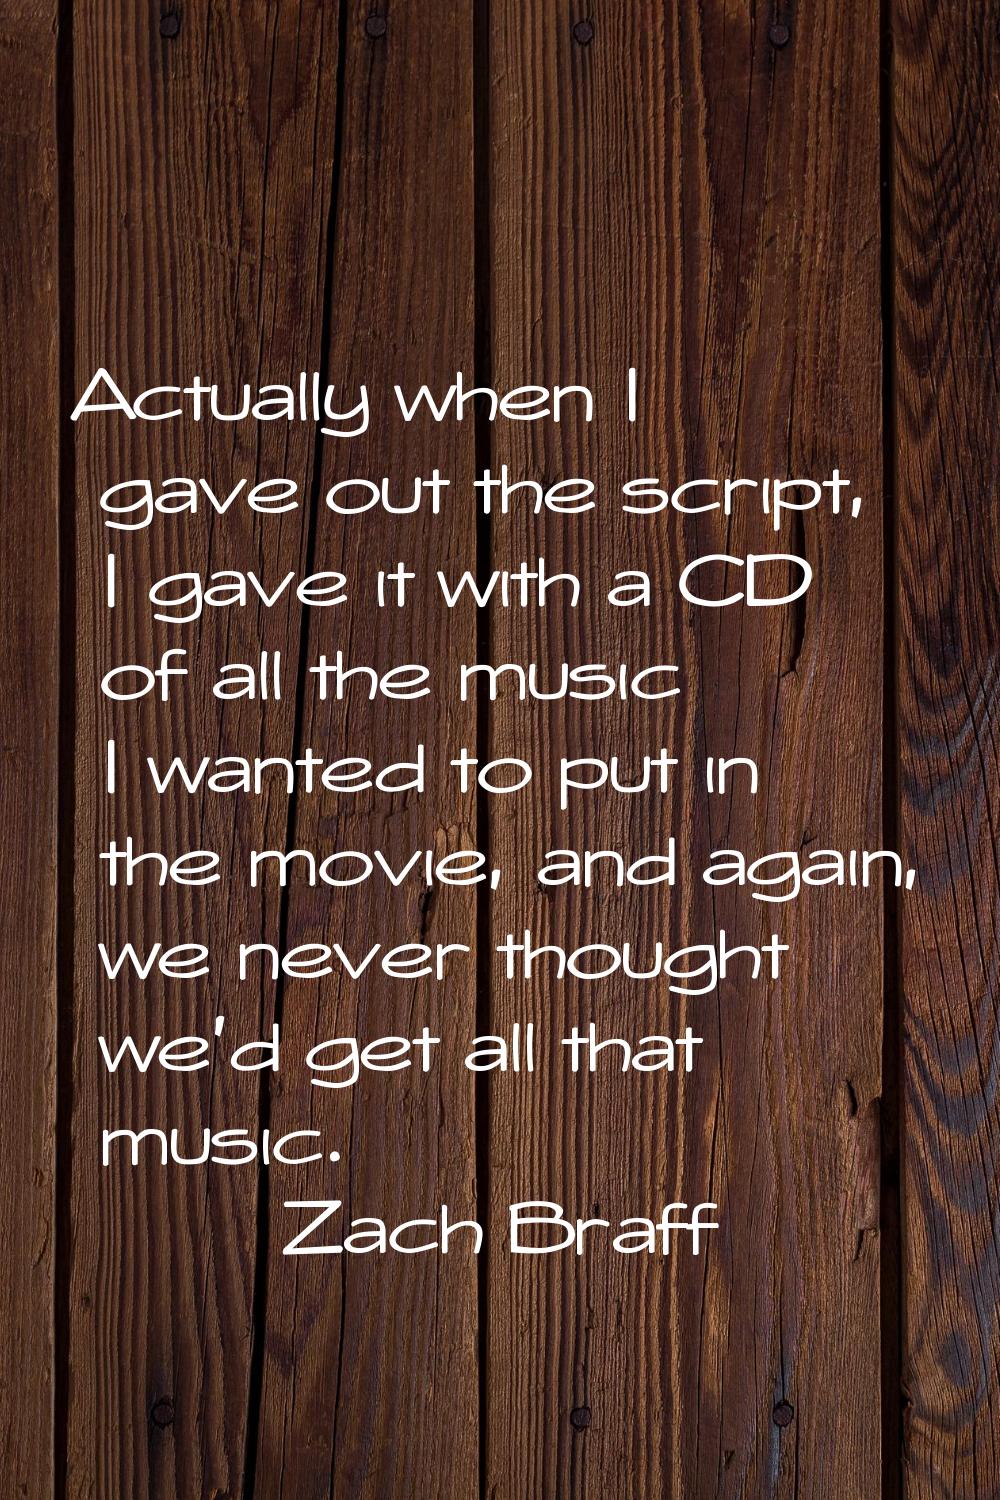 Actually when I gave out the script, I gave it with a CD of all the music I wanted to put in the mo